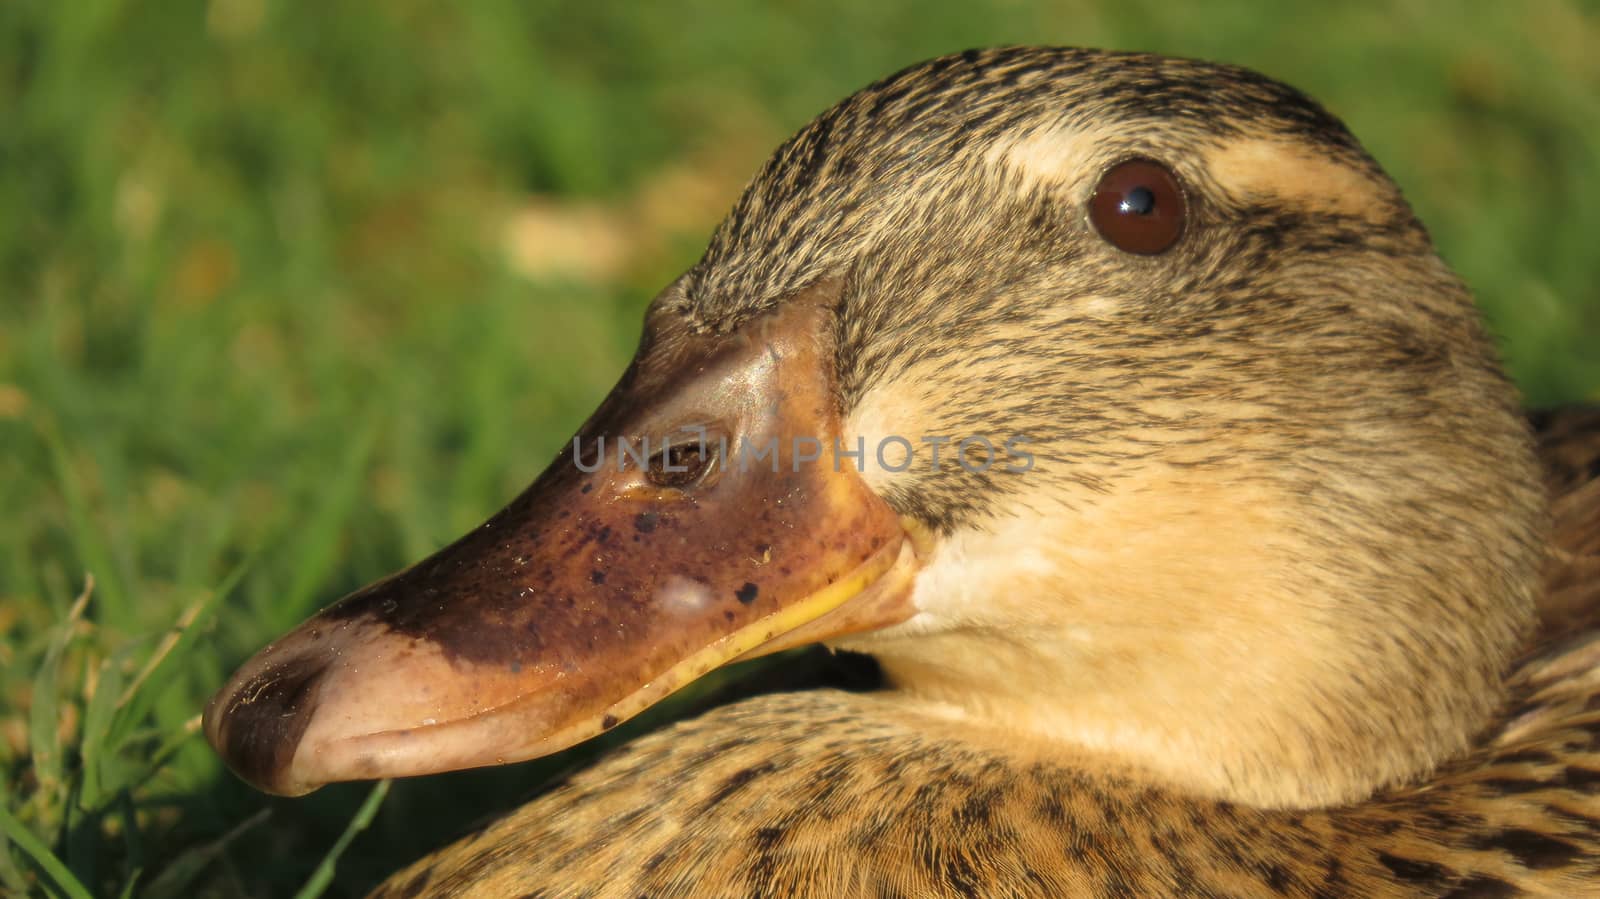 A close up of a brown duck basking in the sunlight during winter to get warm                               